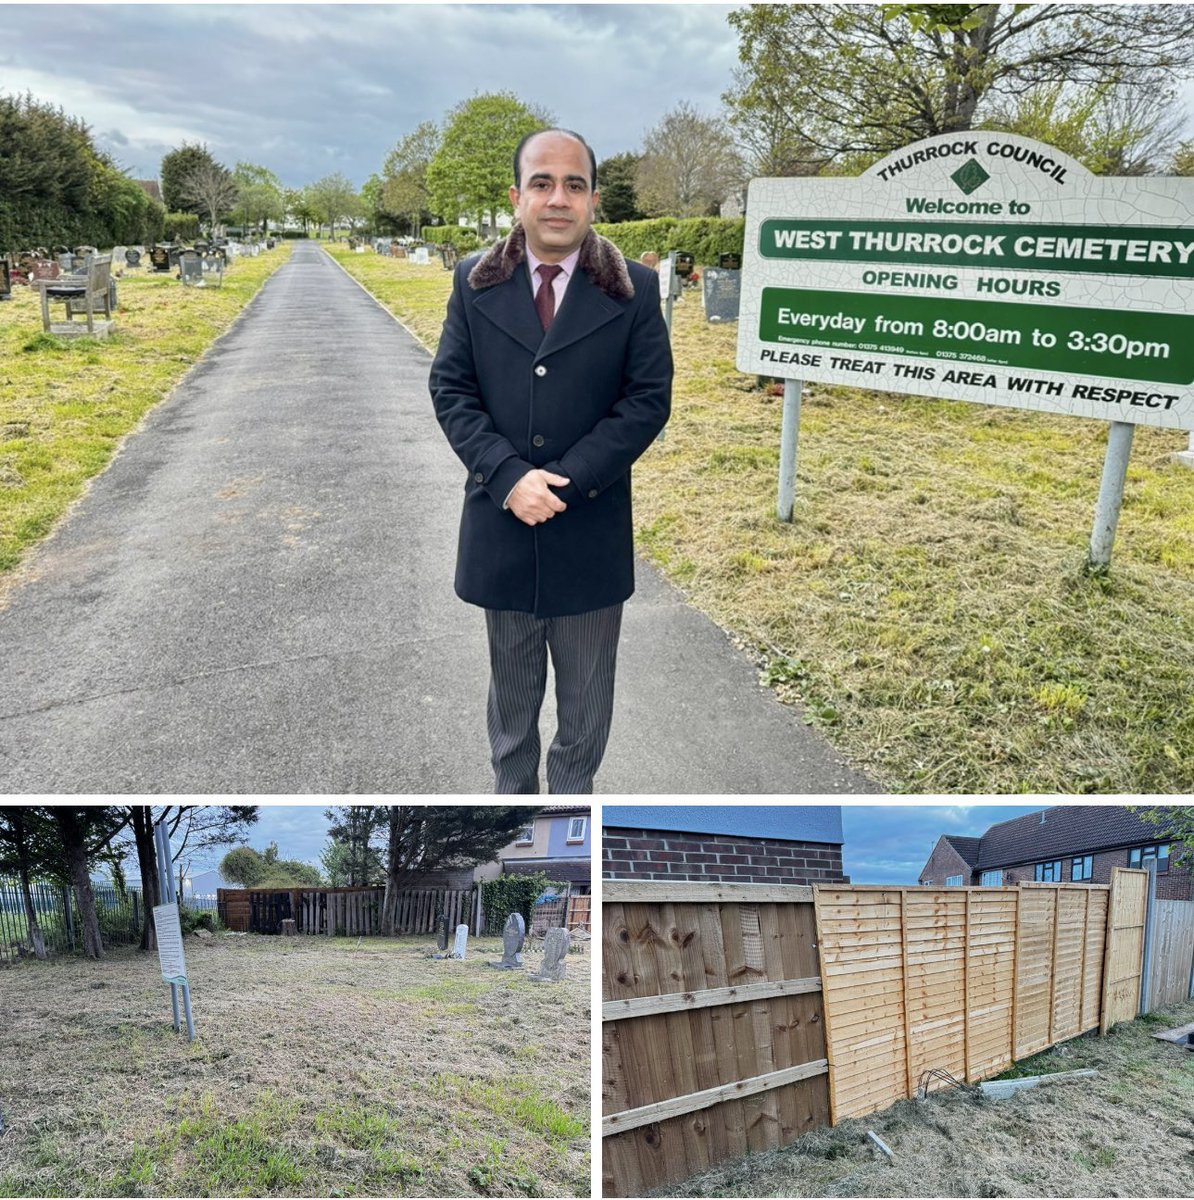 #MoreImprovements 

The road within #WestThurrock cemetery was resurfaced and remaining damaged fence panels were replaced. The grass and hedges are regulalry being cut and trimmed. 

#CllrQaisarAbbas #MakingThingsBetter